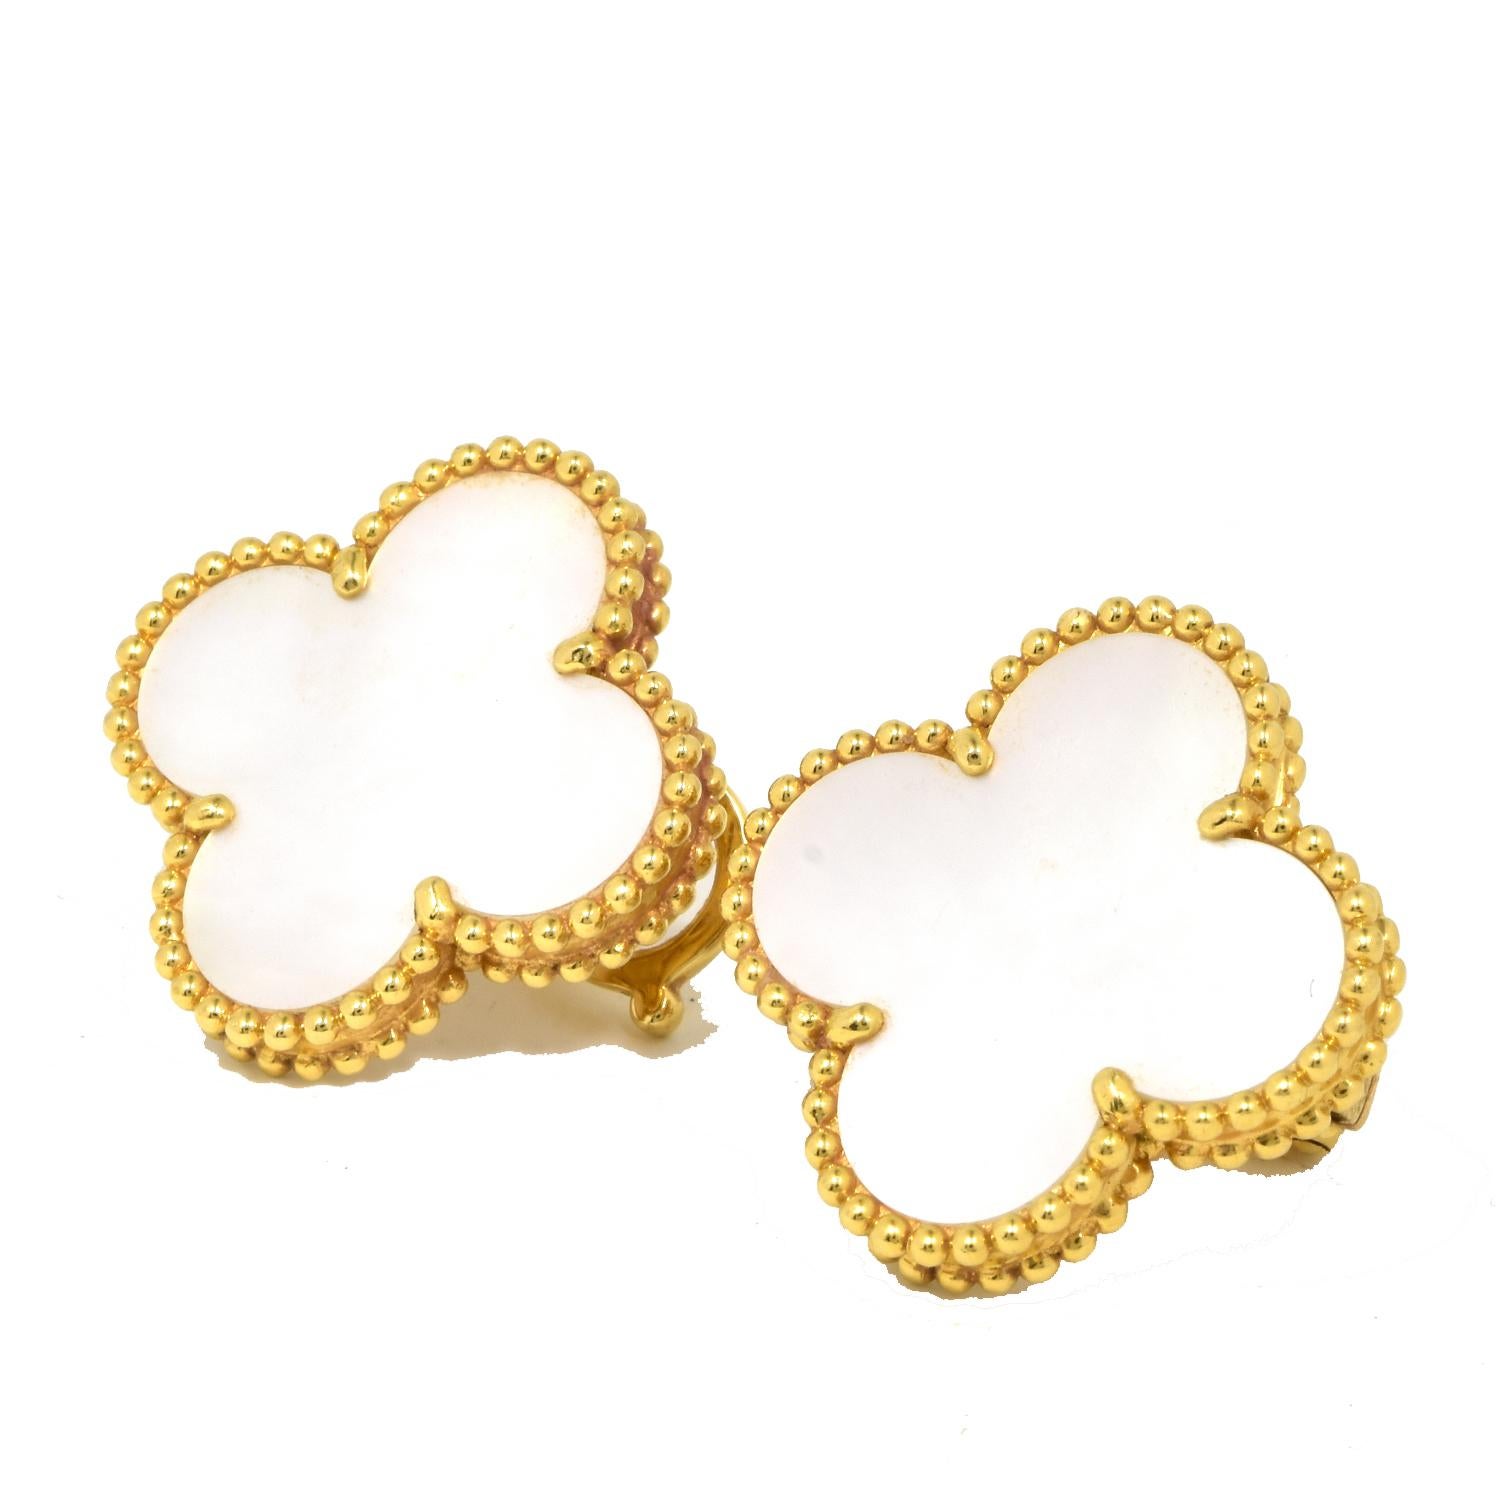 Designer:  Van Cleef & Arpels 

​​​​​​​Collection:  Magic Alhambra

Style:  Motif Earrings

Metal Type: Yellow Gold 

Metal Purity: 18k

Stone:  White Mother of Pearl 

Earring Size : Large

Earring Dimensions: 0.75 x 0.75 inches

Earring System :